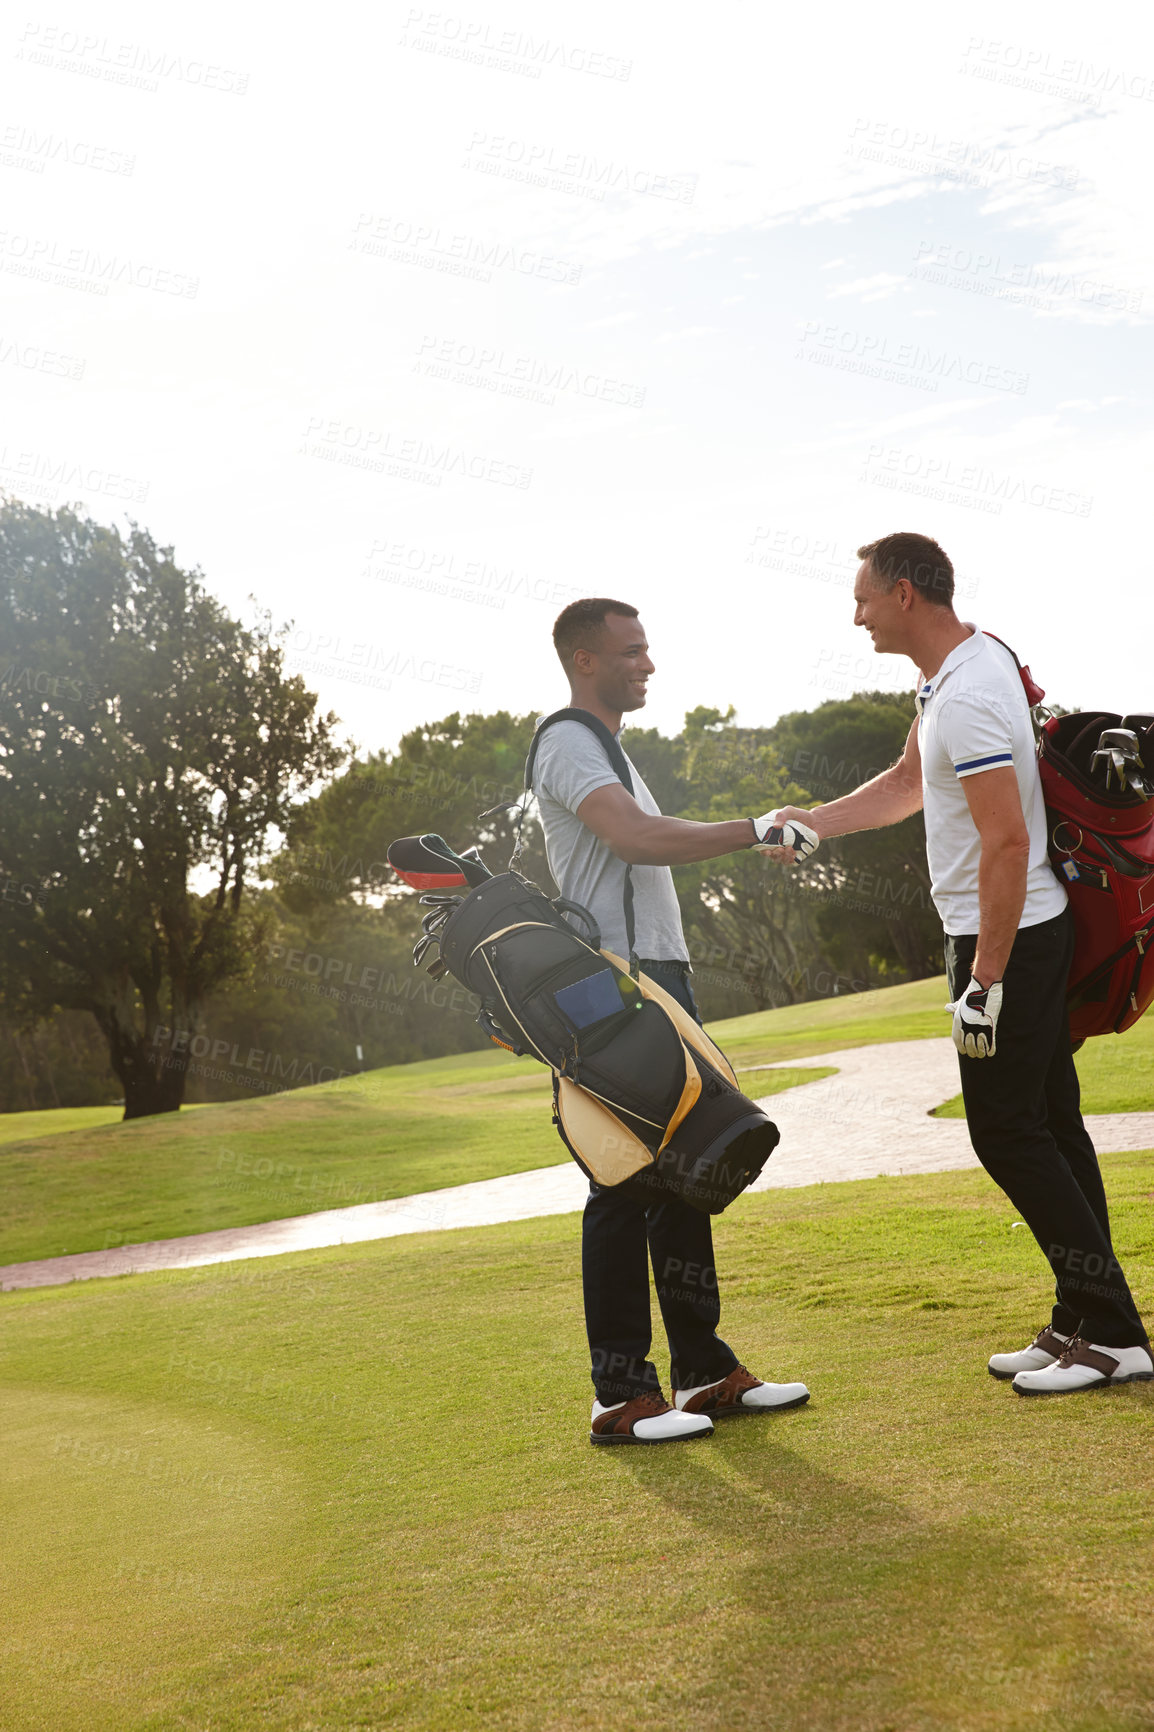 Buy stock photo Happy man, friends and handshake with golfer on green grass for teamwork, match or outdoor game. Young male person or people shaking hands for friendly sport or competition together on golf course